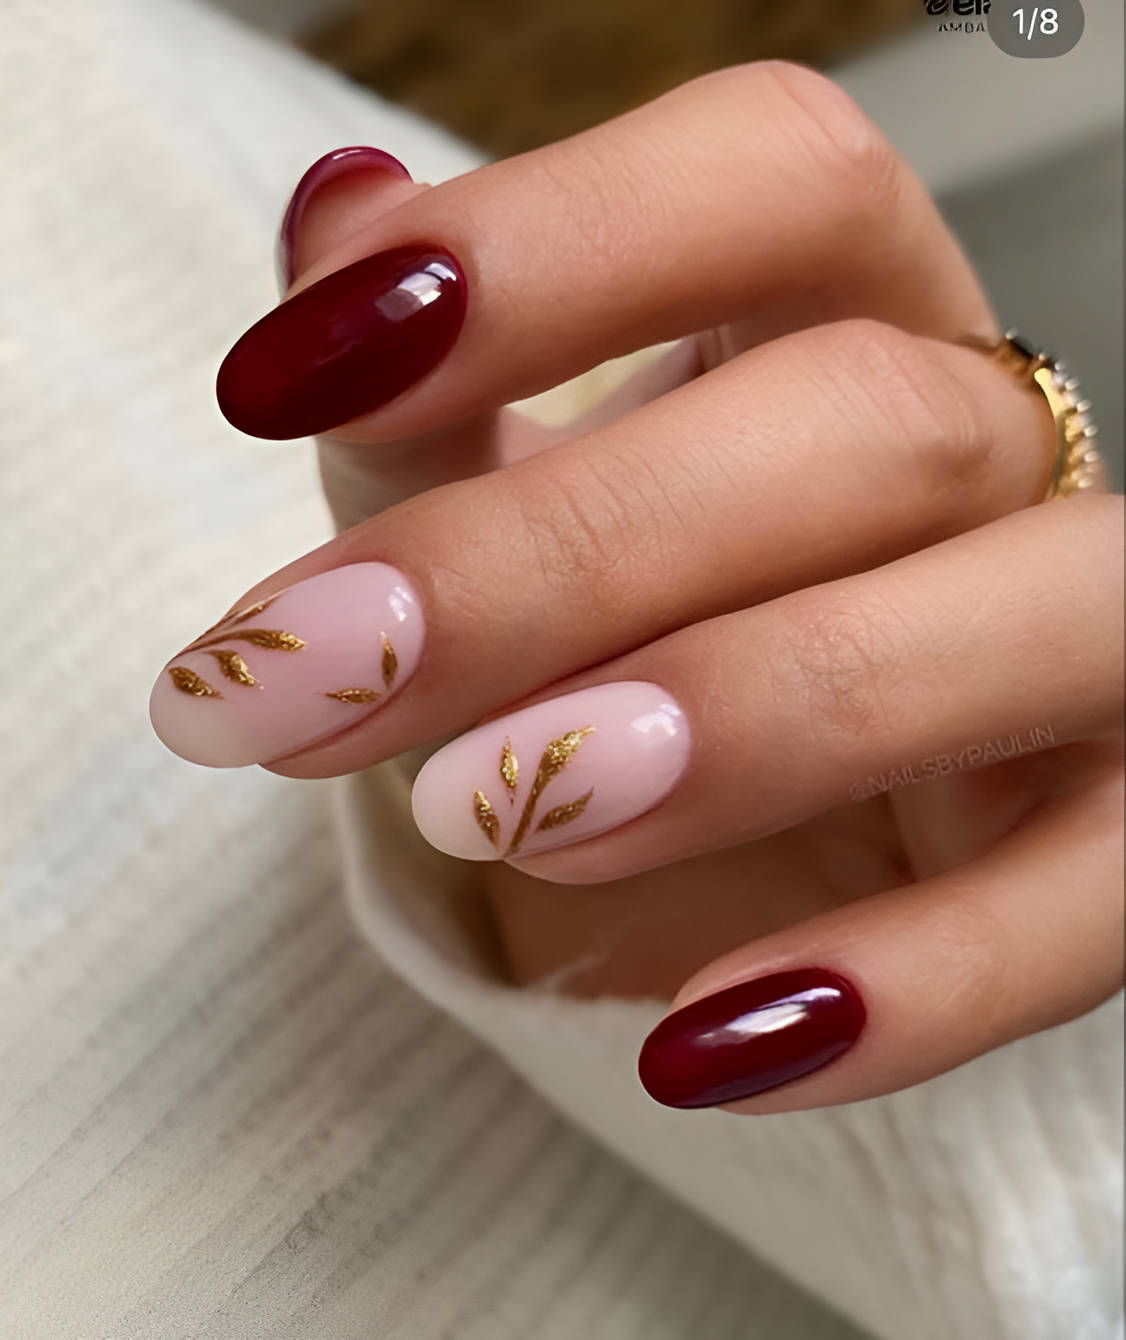 Short Burgundy Nails With Gold Leaves